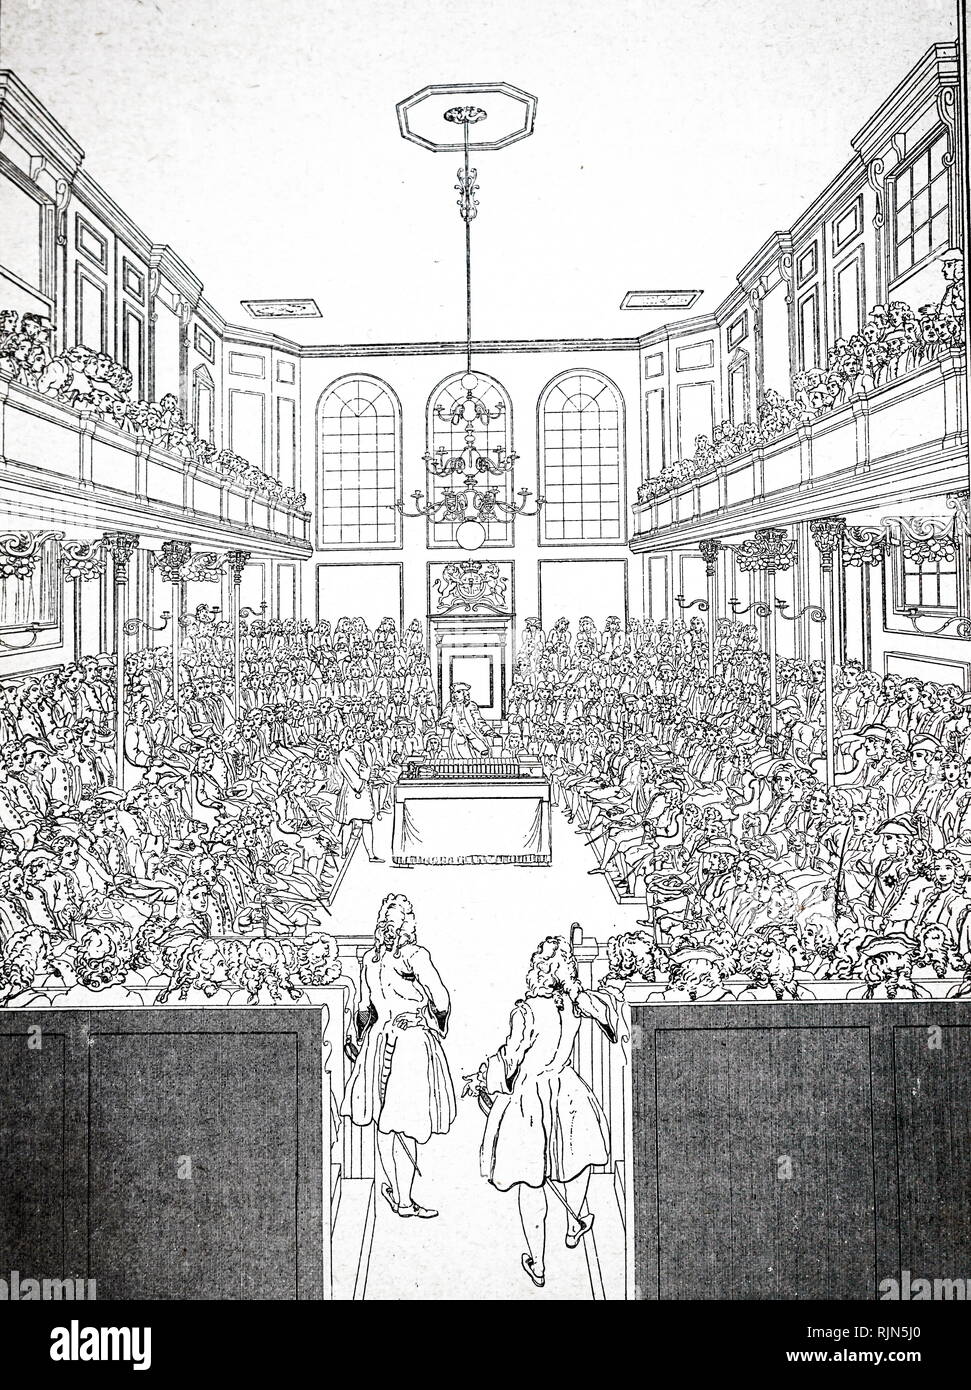 Illustration showing Interior of the House Of Commons in 1742. Stock Photo